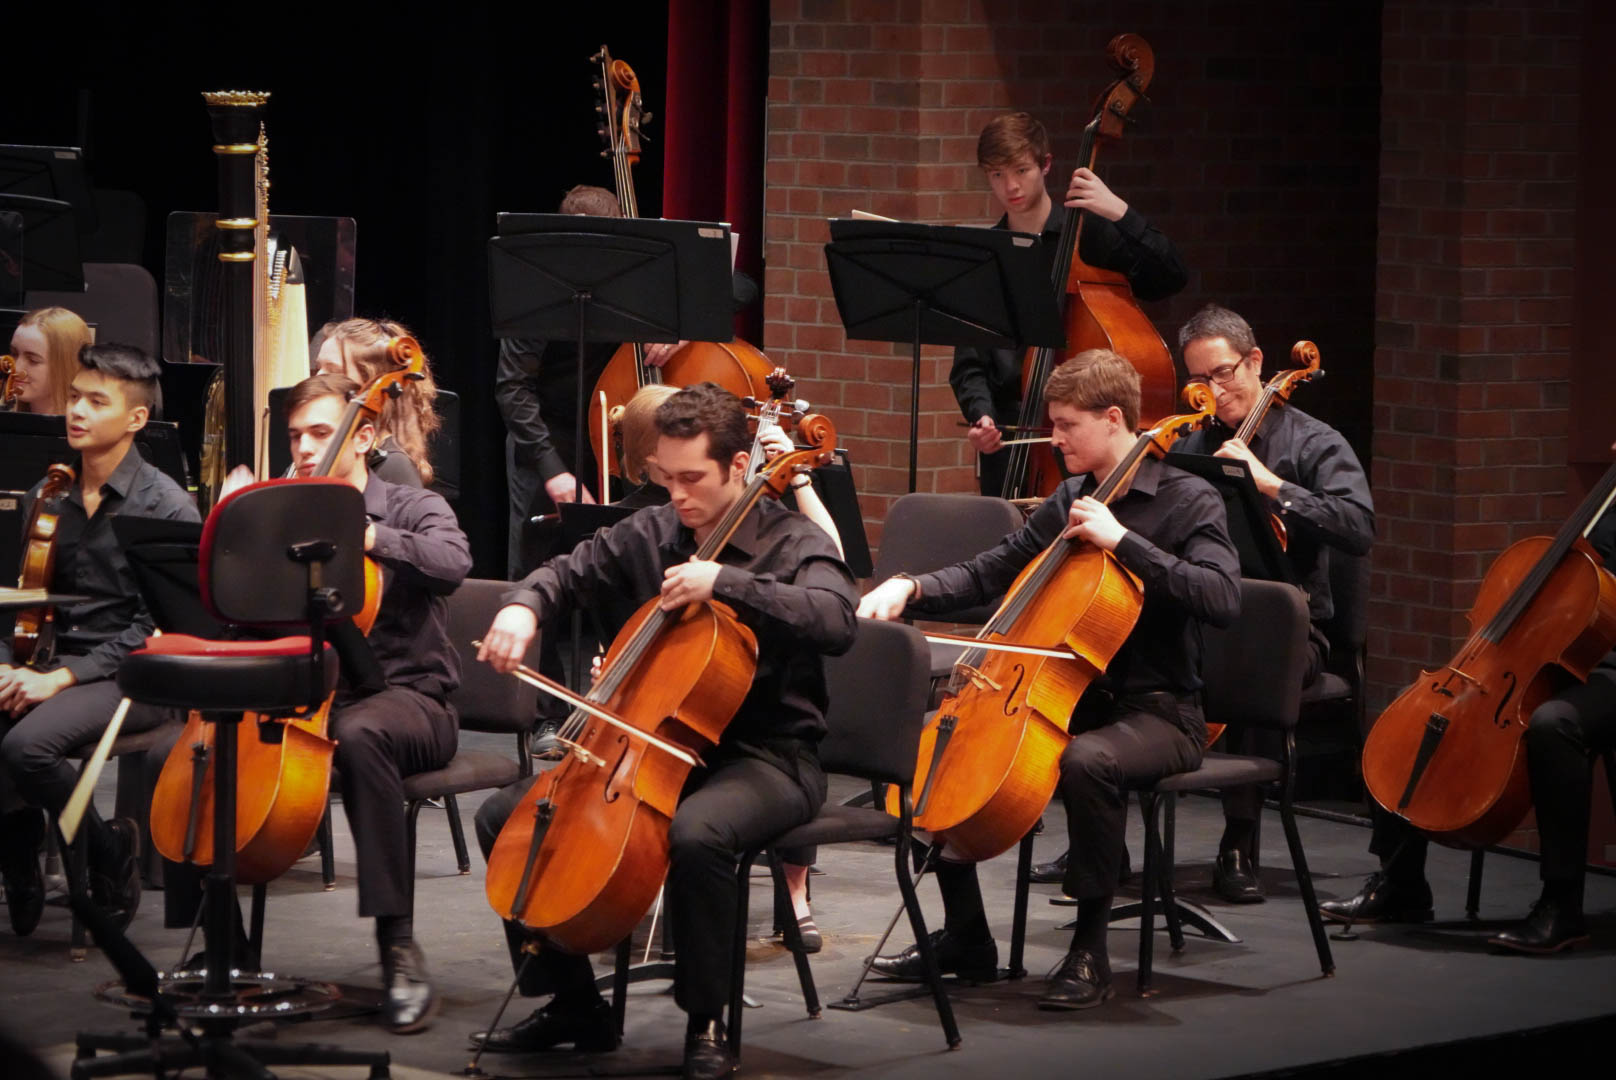 Orchestra performs program of classical music, film scores